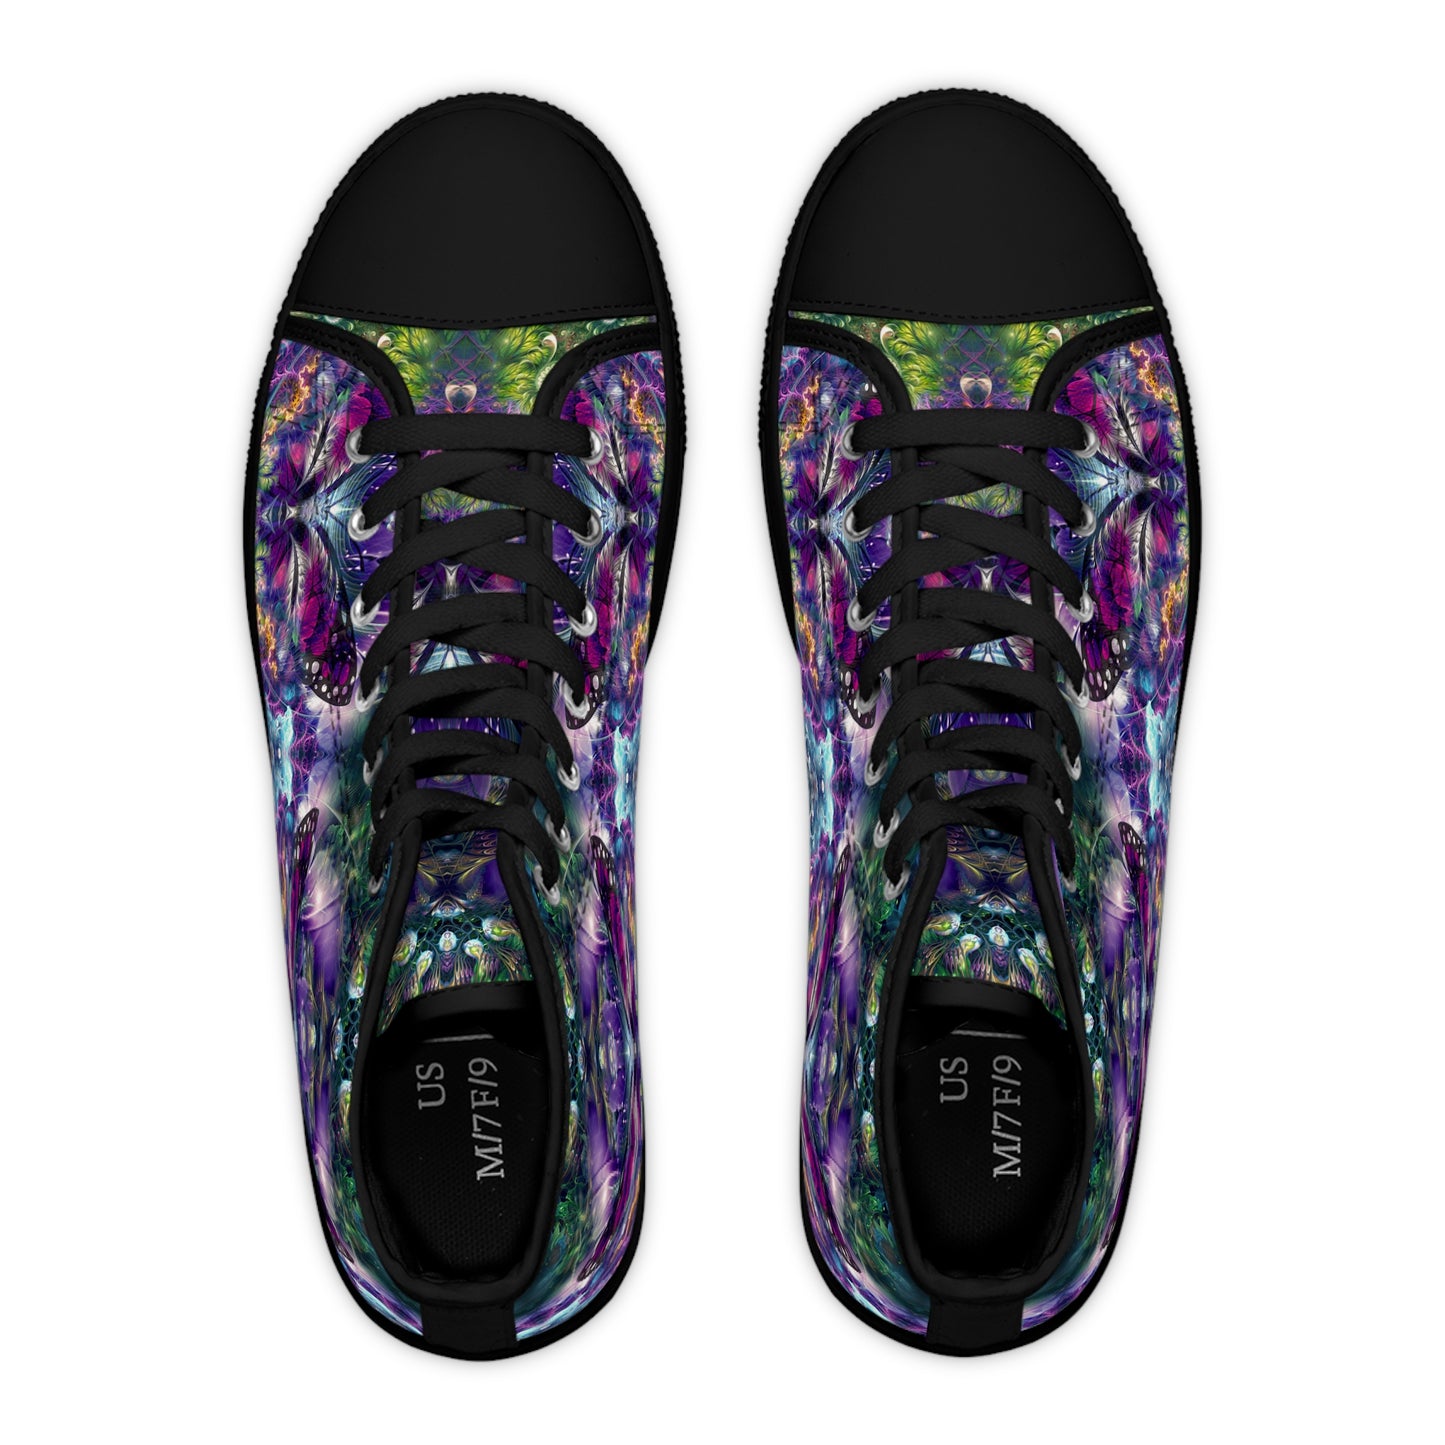 "Emergence V3" WOMEN'S HIGH TOP SNEAKERS